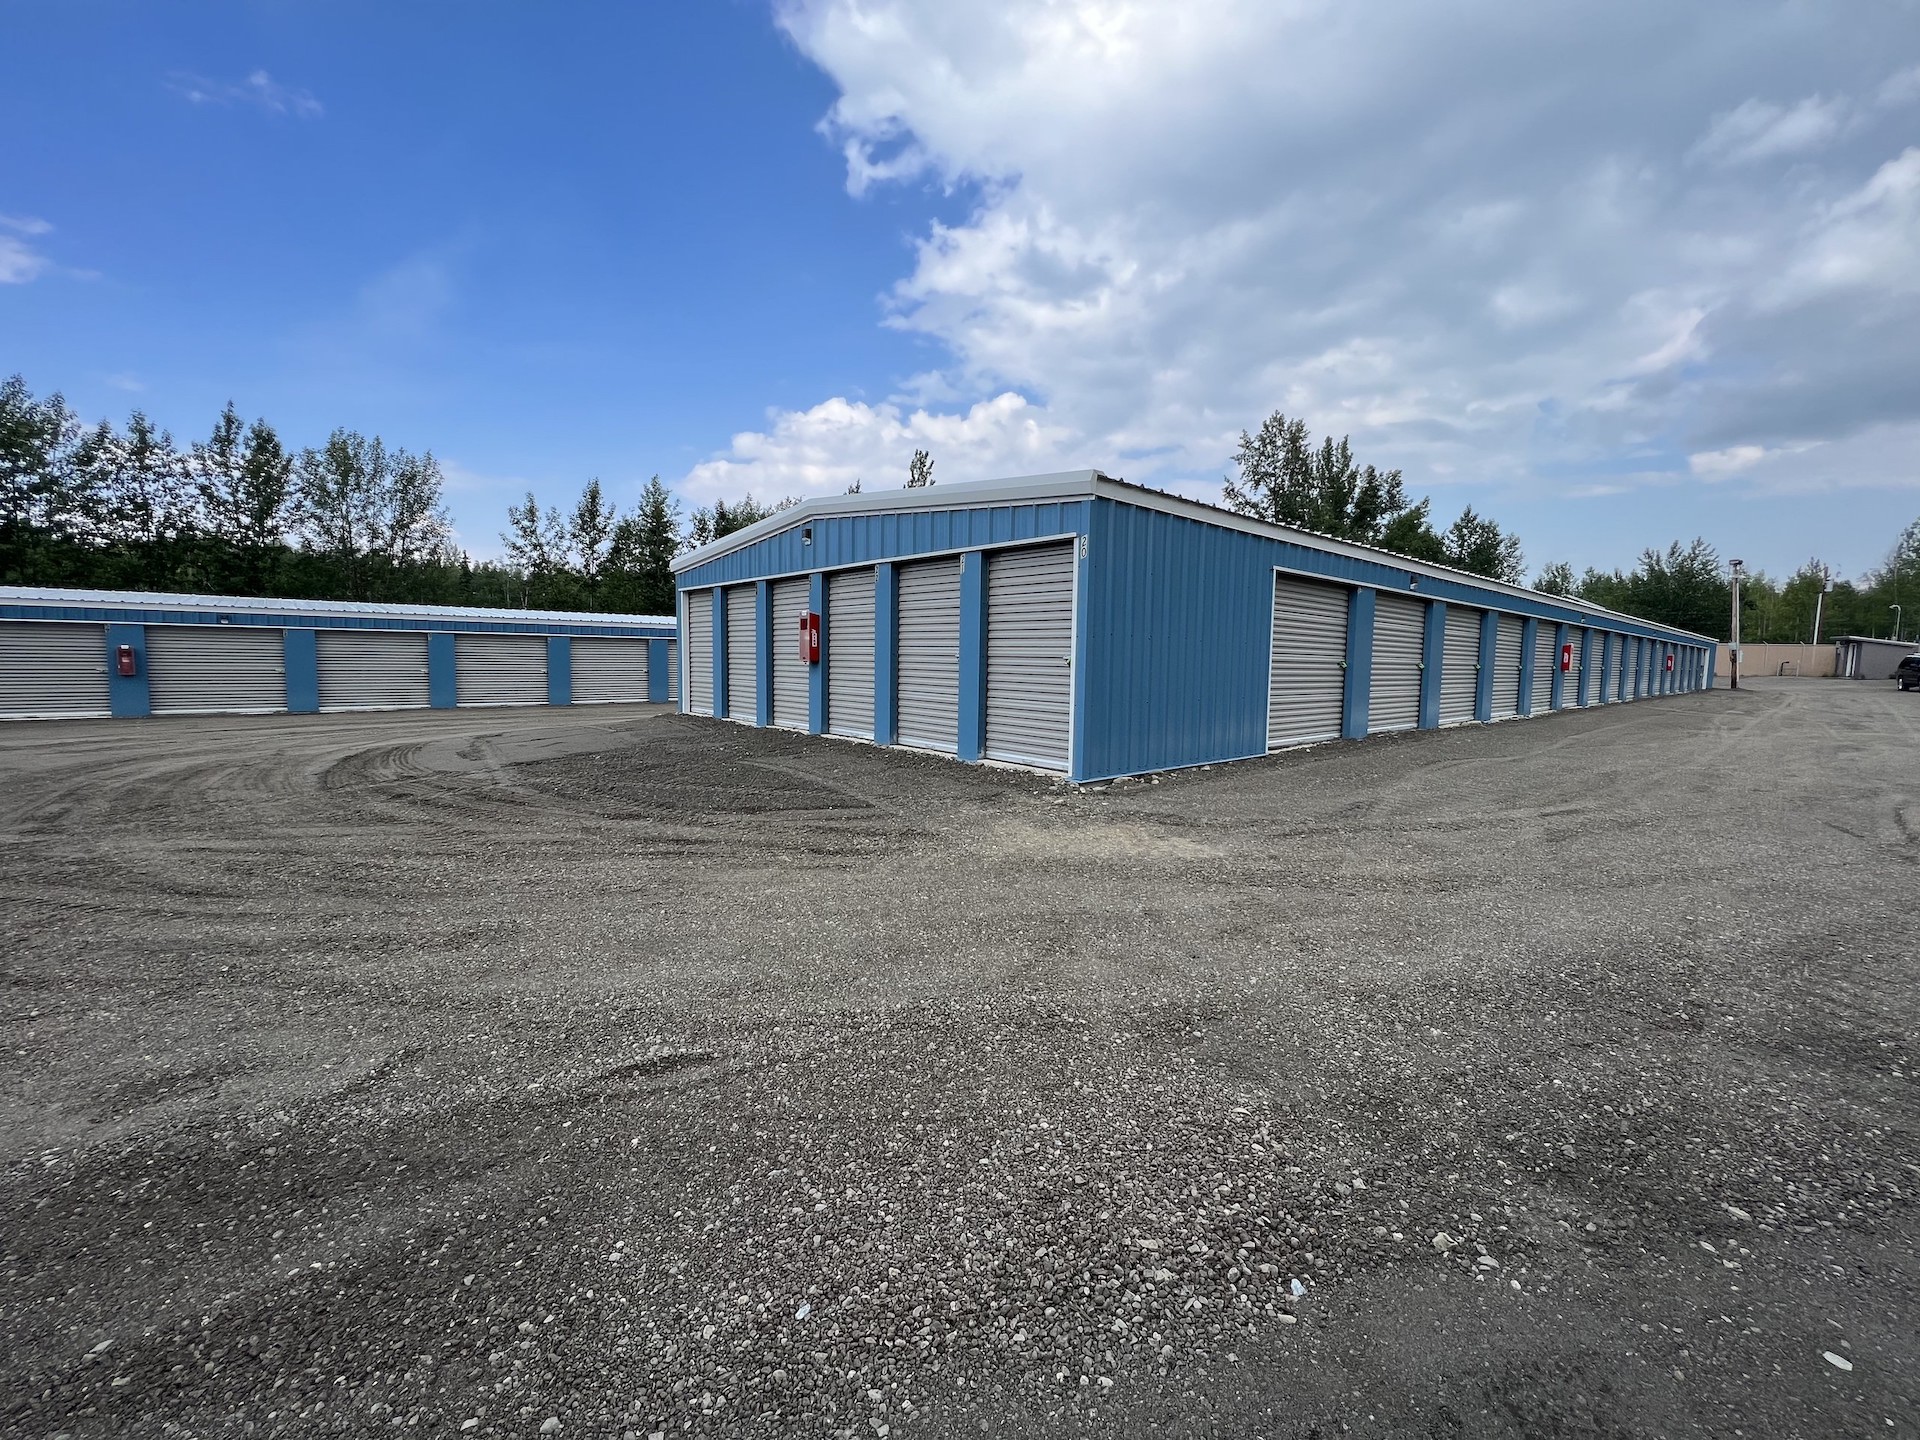 This Secure Self-Storage Facility Near Eagle River, AK Offers Insured Storage